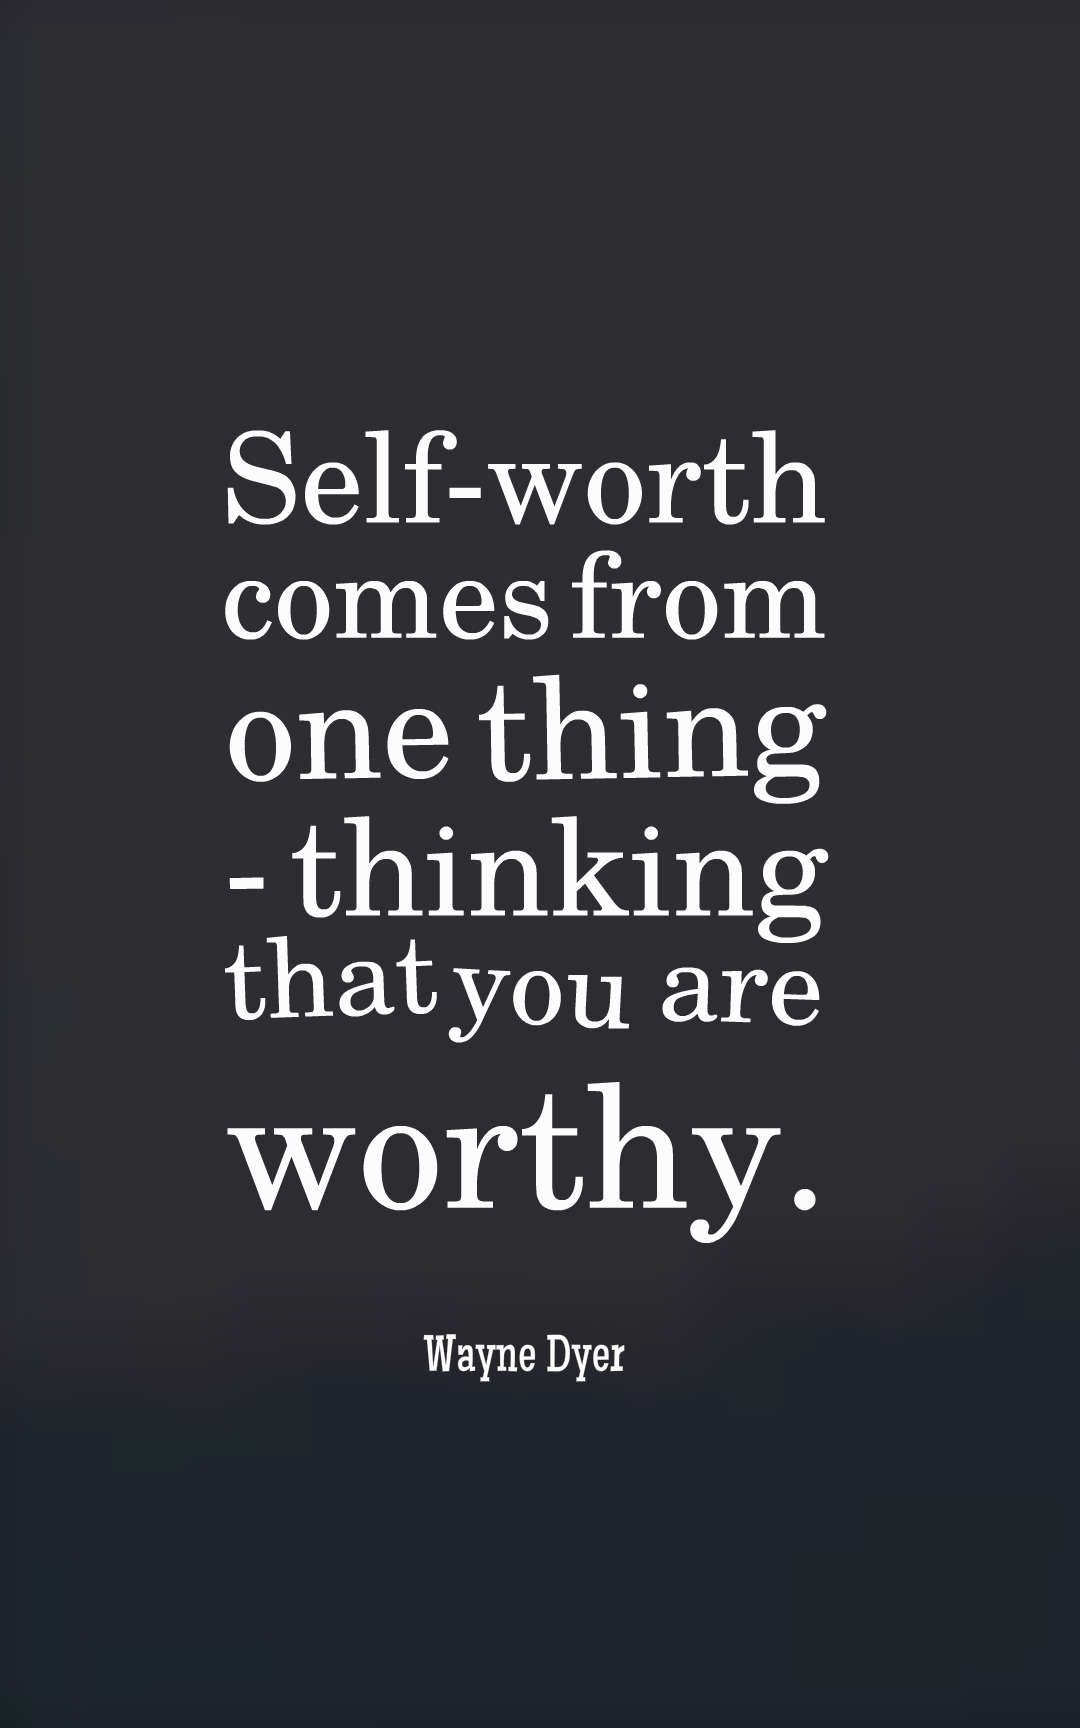 Self-worth comes from one thing - thinking that you are worthy.